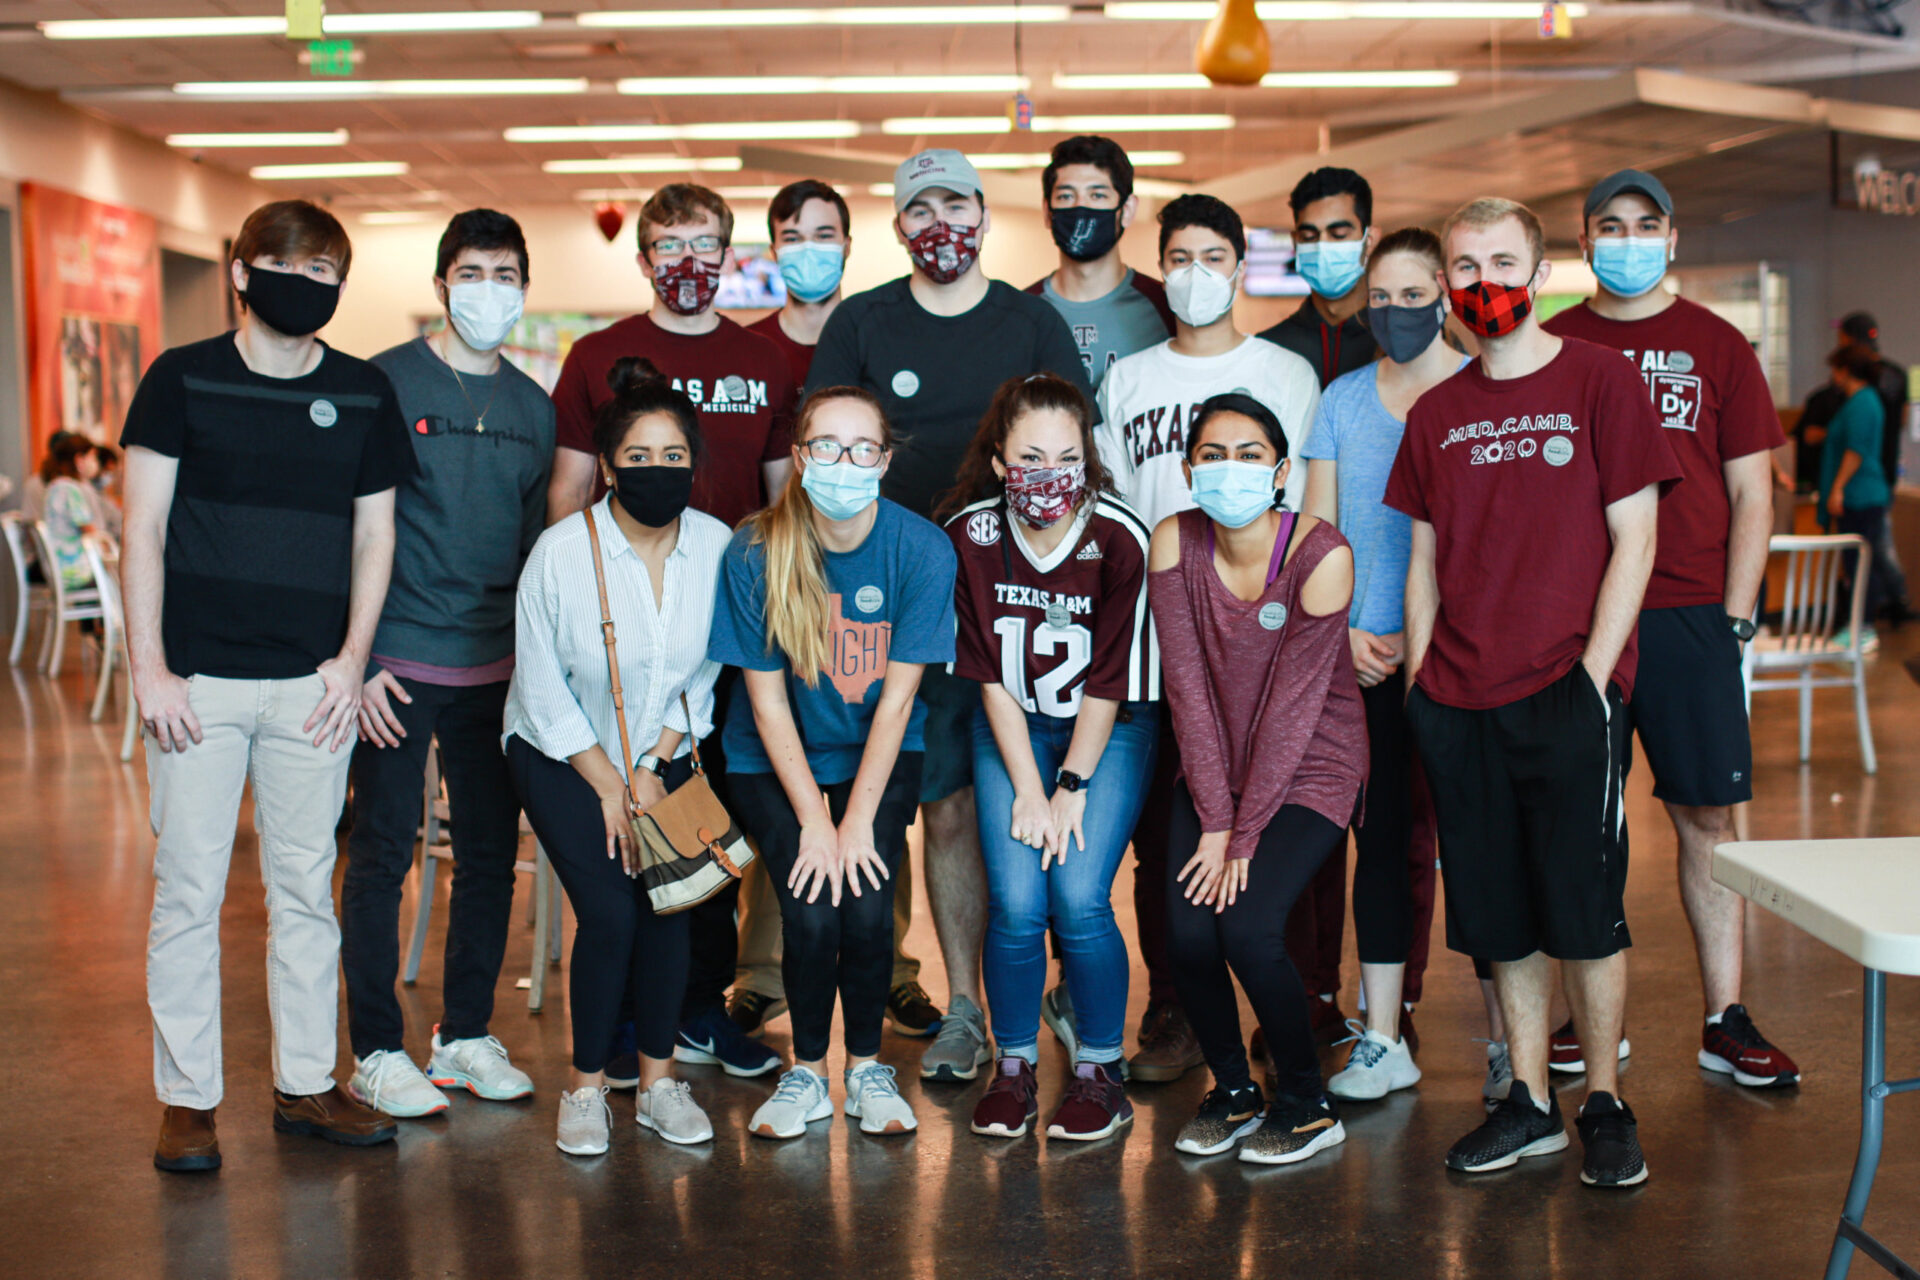 This photo was also taken during the class of 2024's volunteer event at the Houston Food Bank. Zhi requested for the group to wear Texas A&M maroon.